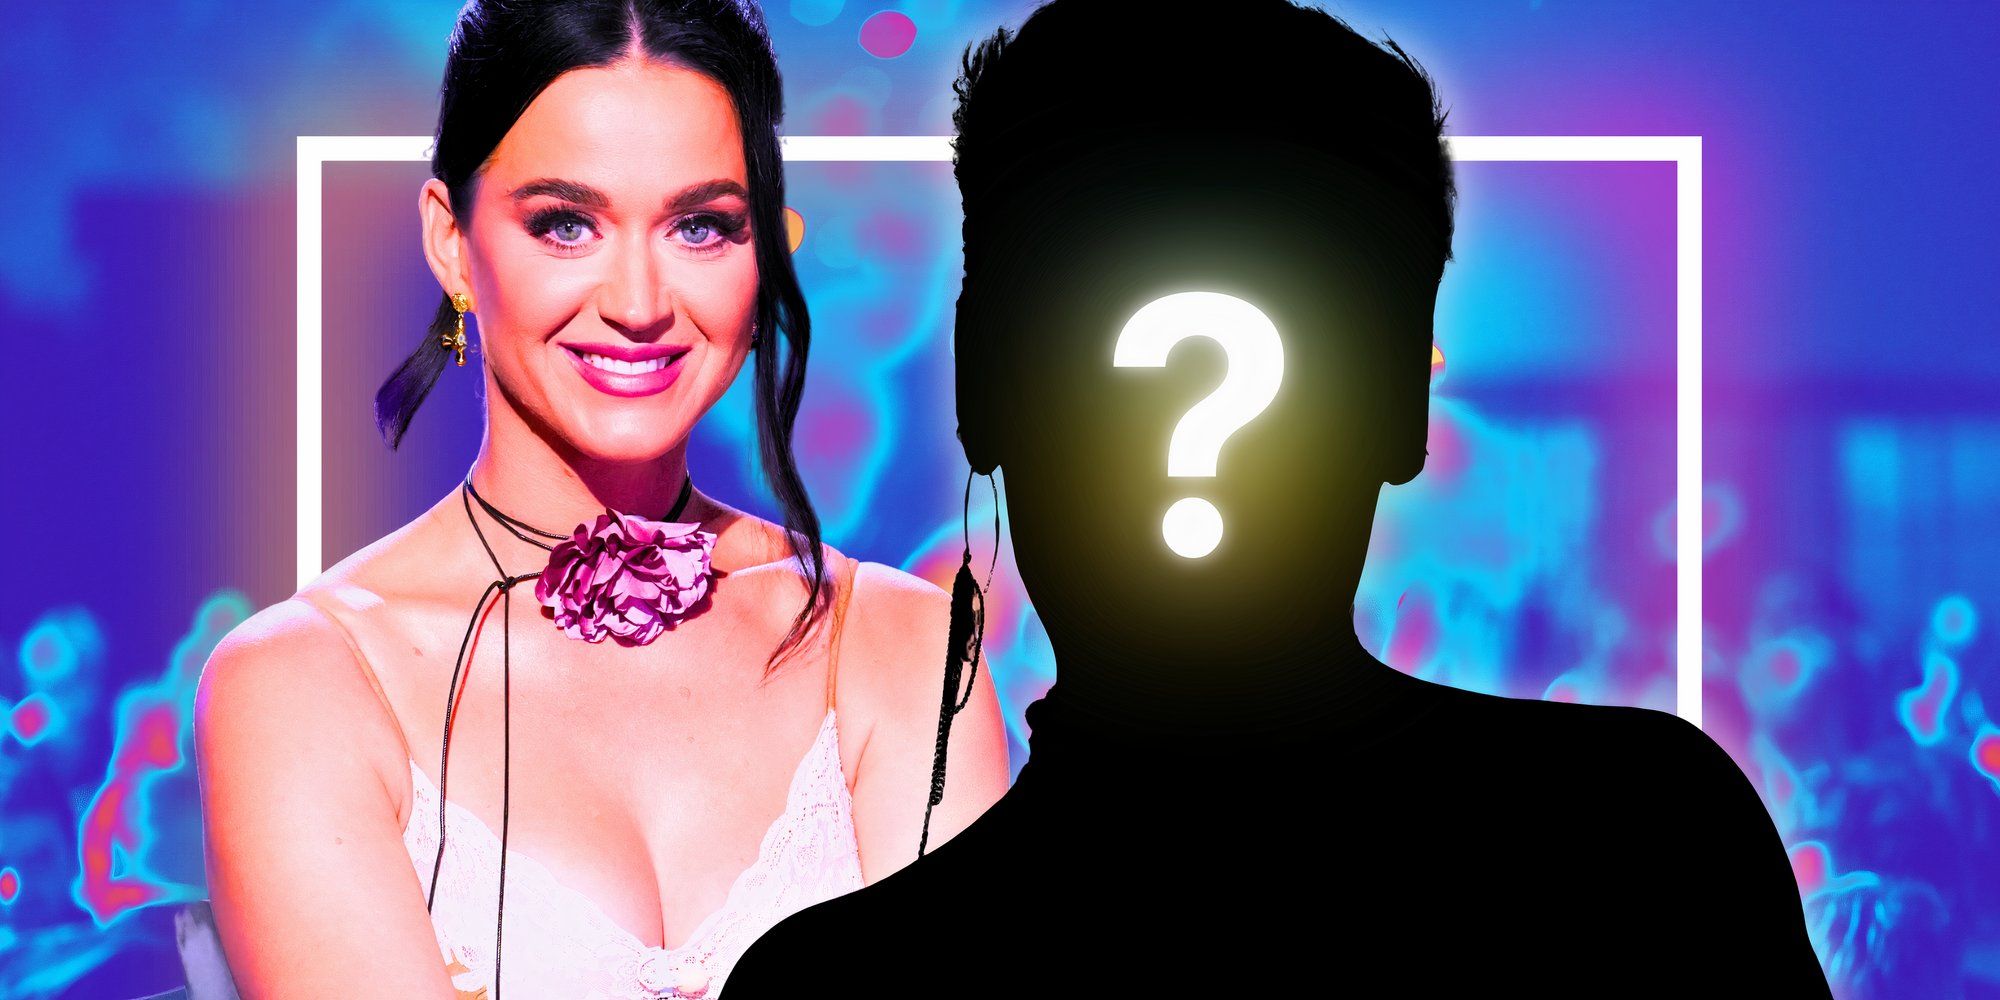 American Idol's Katy Perry smiles next to a silhouette of Pink.